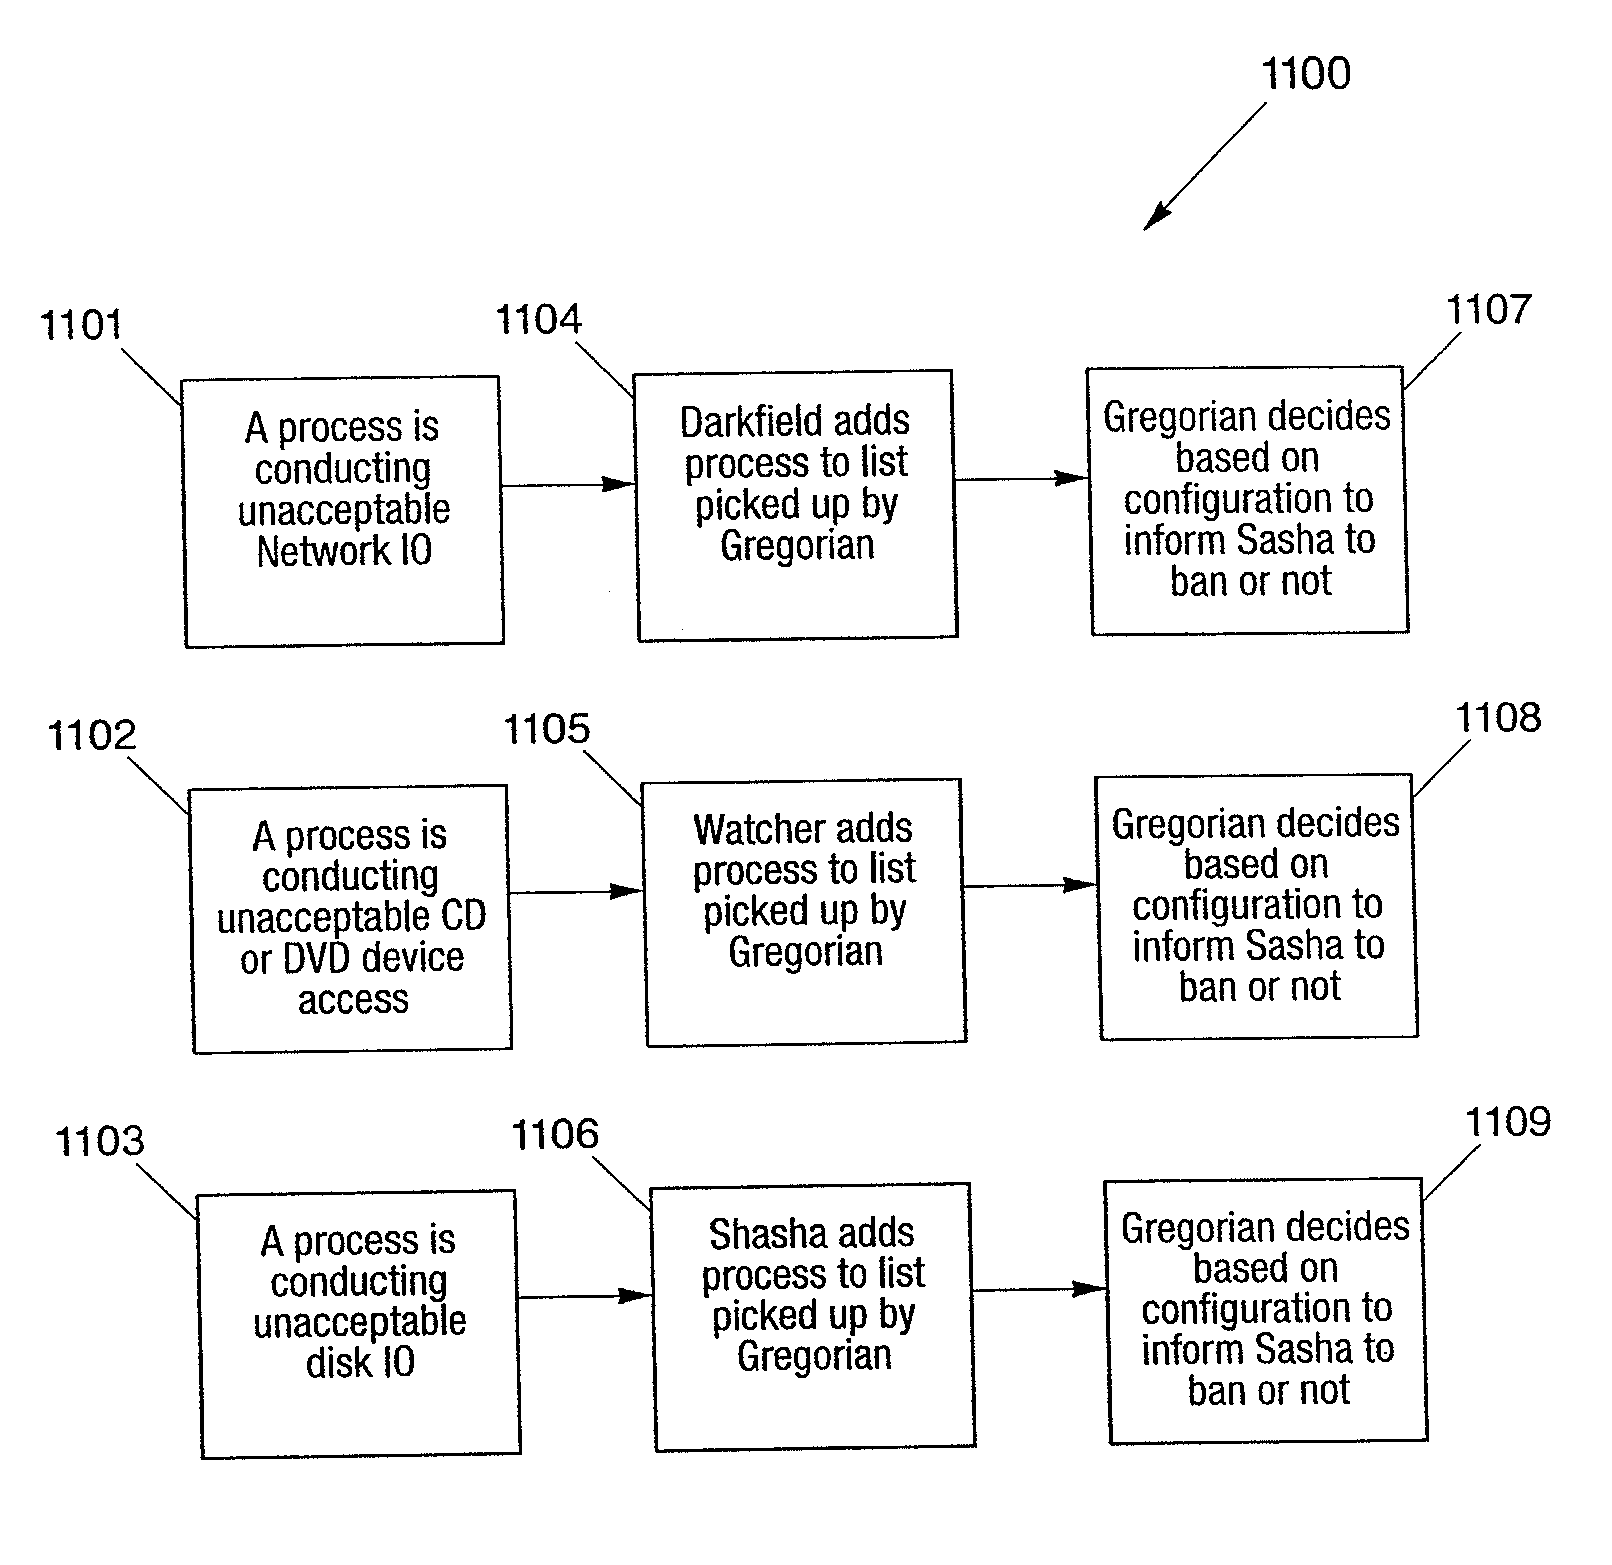 Method and System for Preventing Unauthorized Access and Distribution of Digital Data